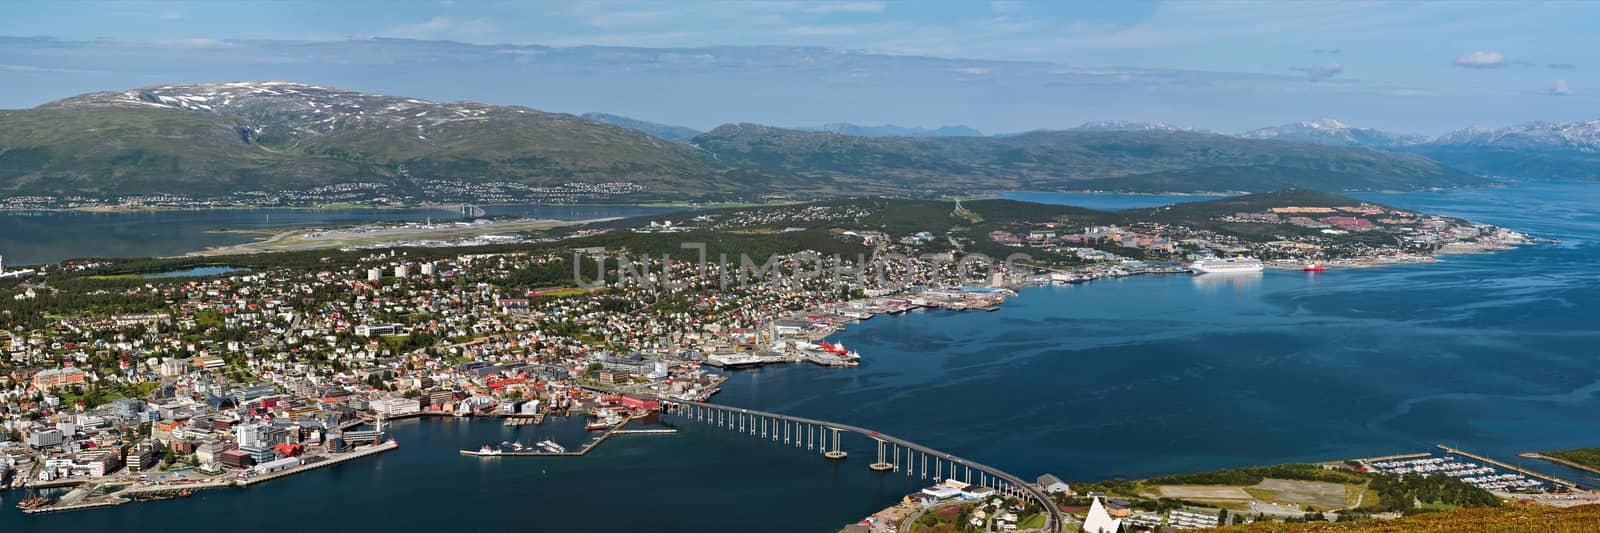 Panoramic view of Tromso and its port seen from the top of a mountain, Norway